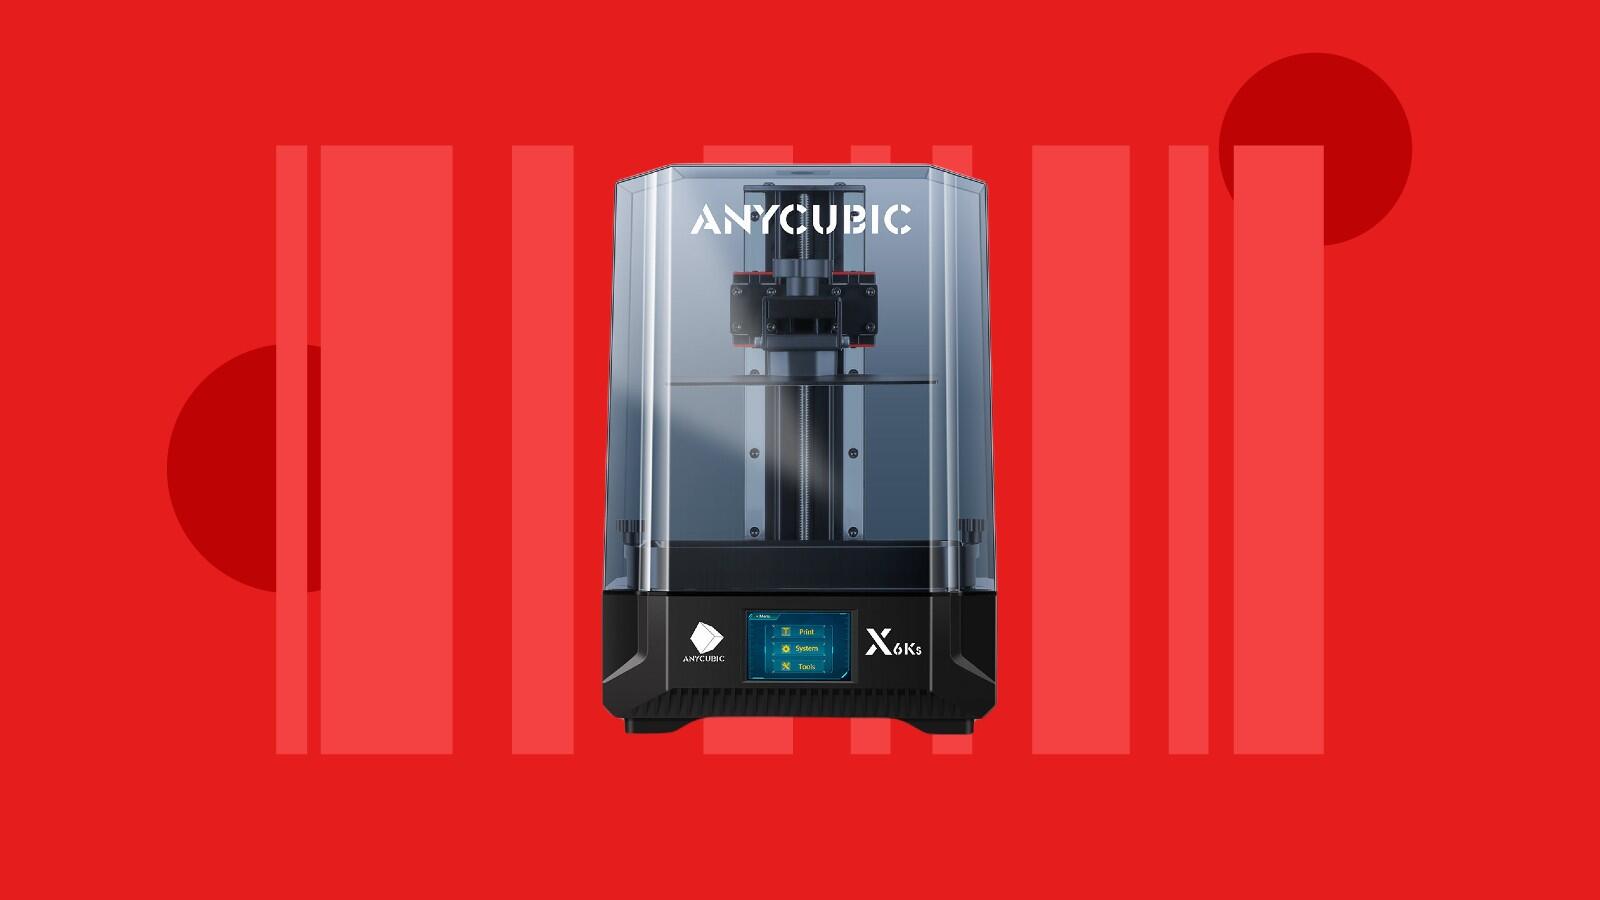 Anycubic's Giant Black Friday Sale Is Live Now With Huge Discounts - CNET